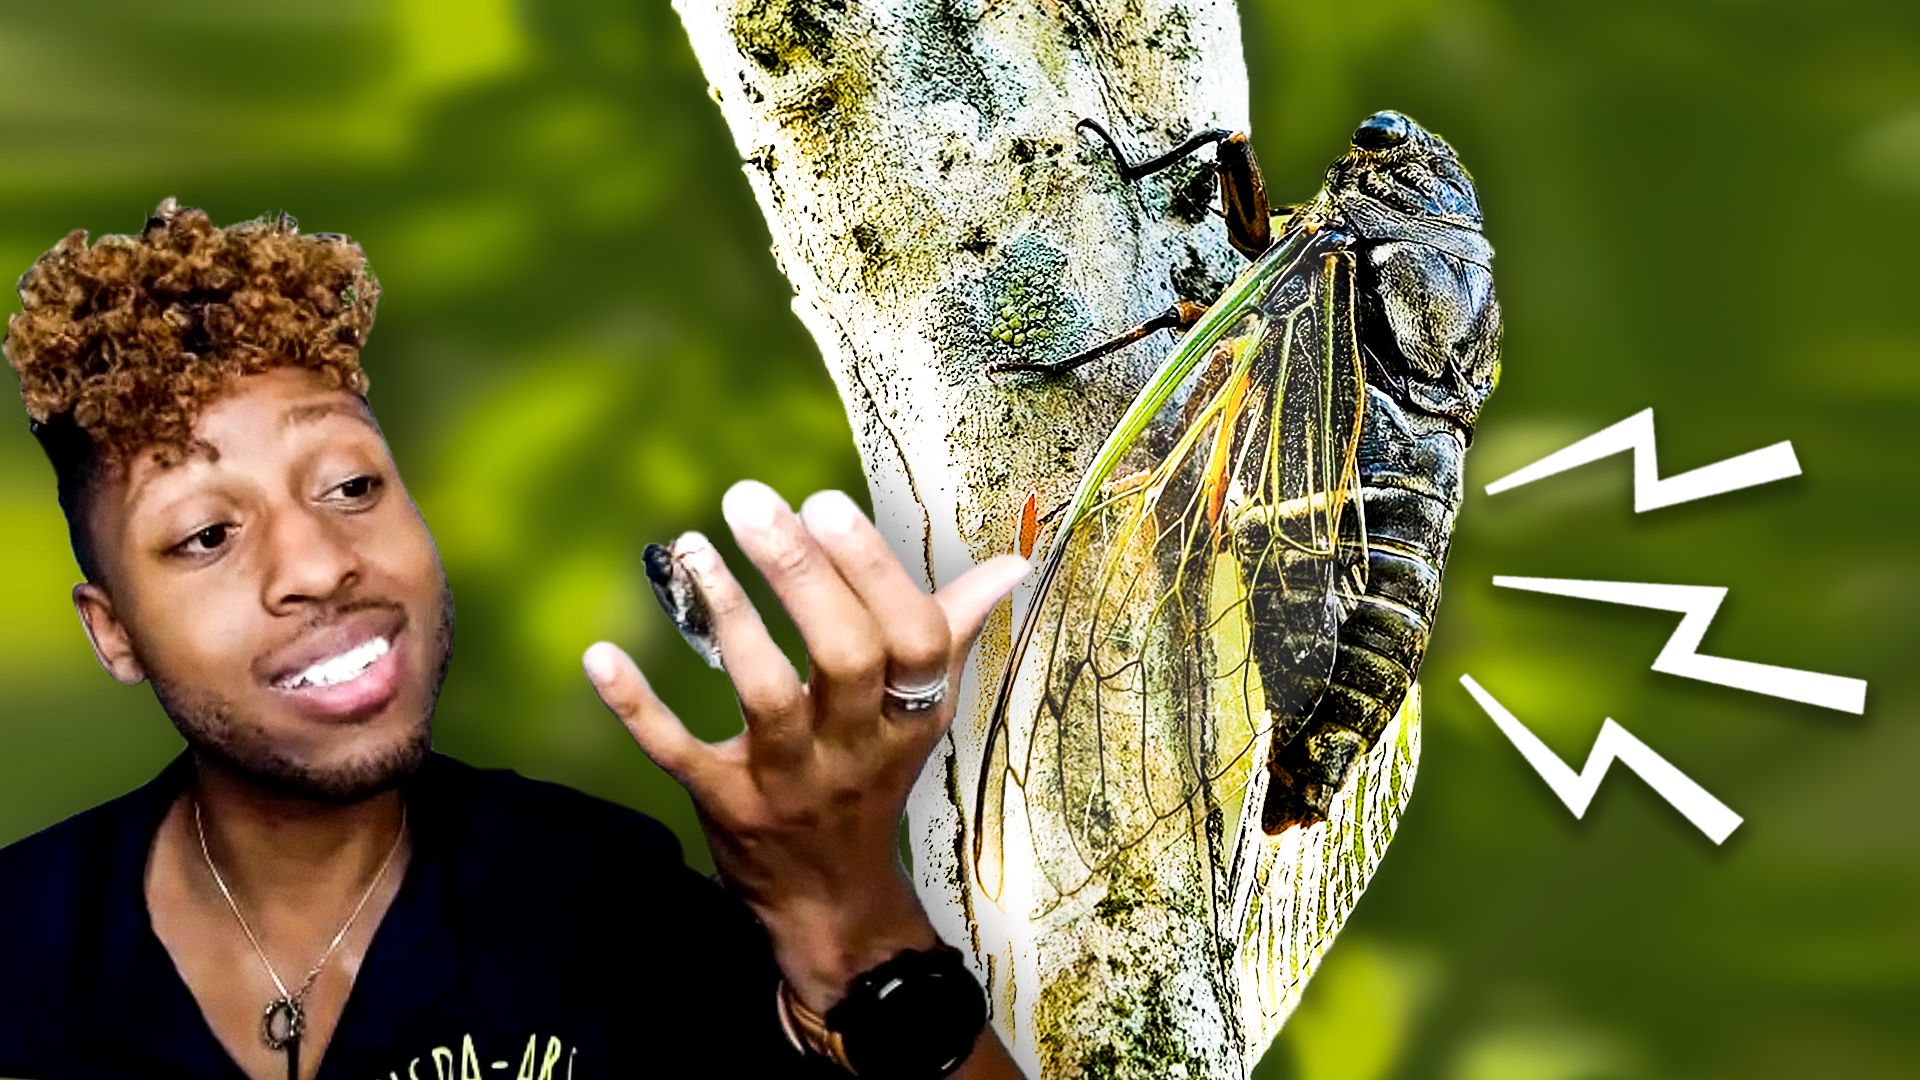 Watch Bug Expert Explains Why Cicadas Are So Loud | Currents | WIRED